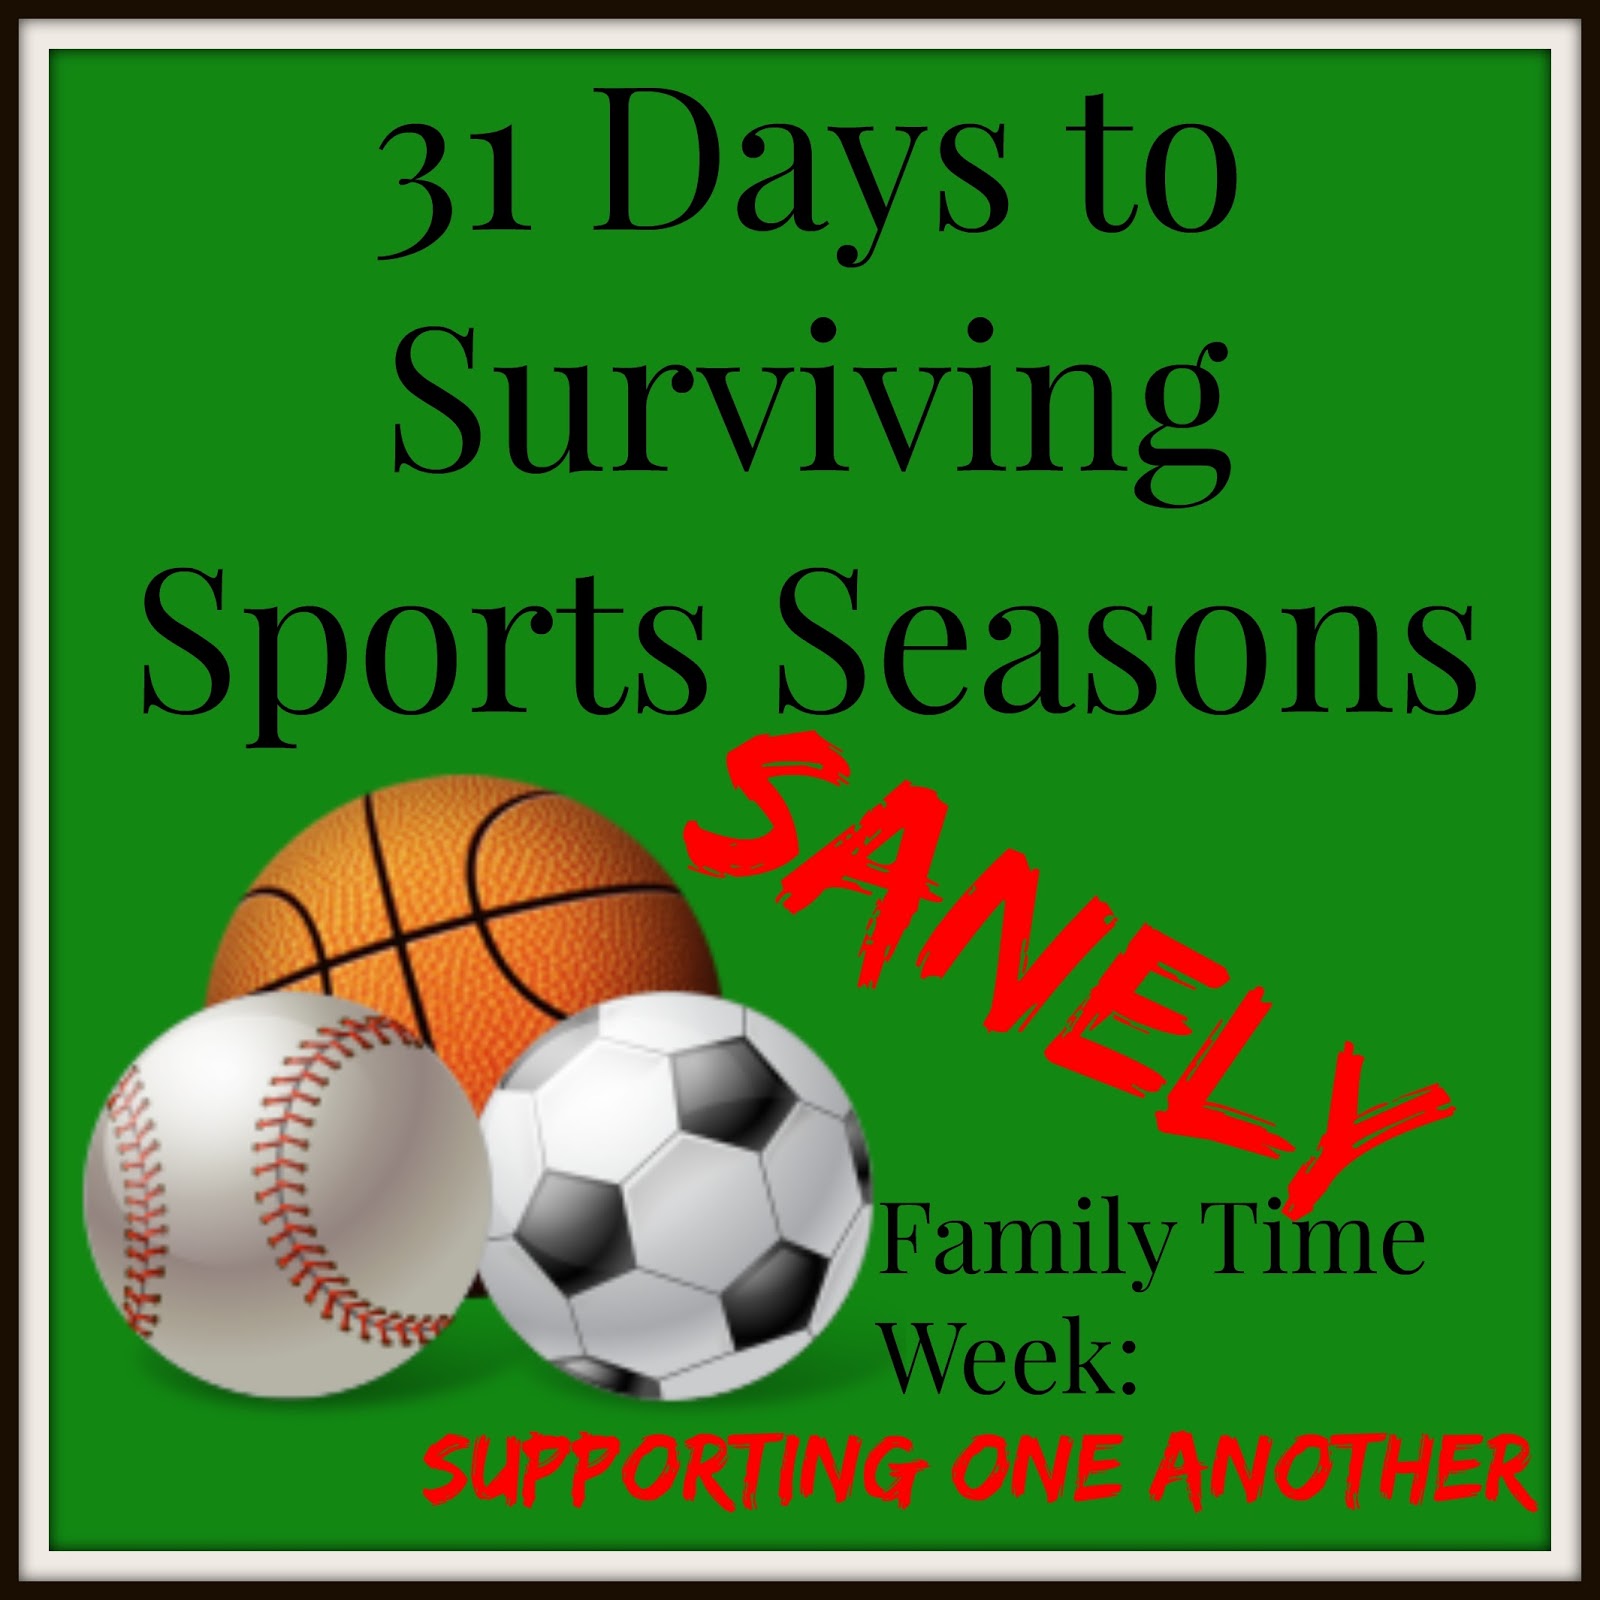 31 Days to Surviving Sports Seasons Sanely: Supporting One Another